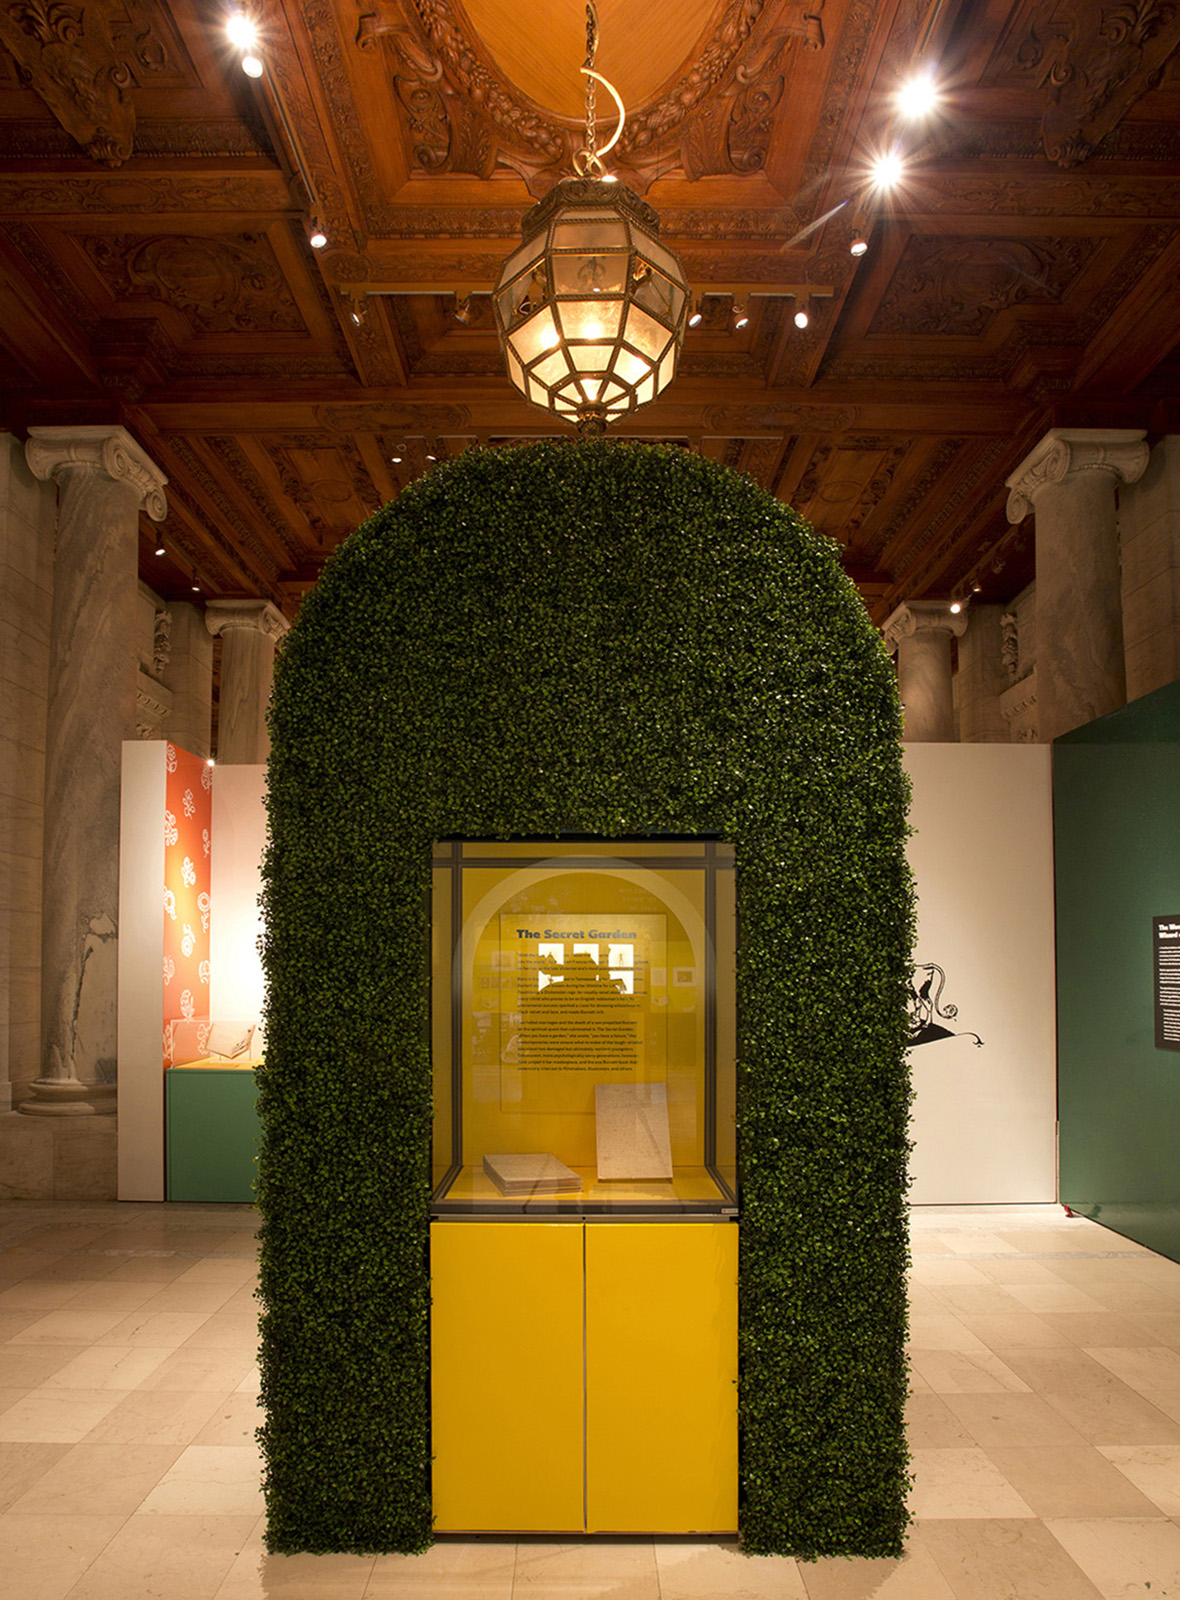 ABC of It. Another example of tactility and respite in the exhibition: additional seating and available books created a reading space for visitors. Here, the complete manuscript of The Secret Garden is displayed on a repurposed display core.